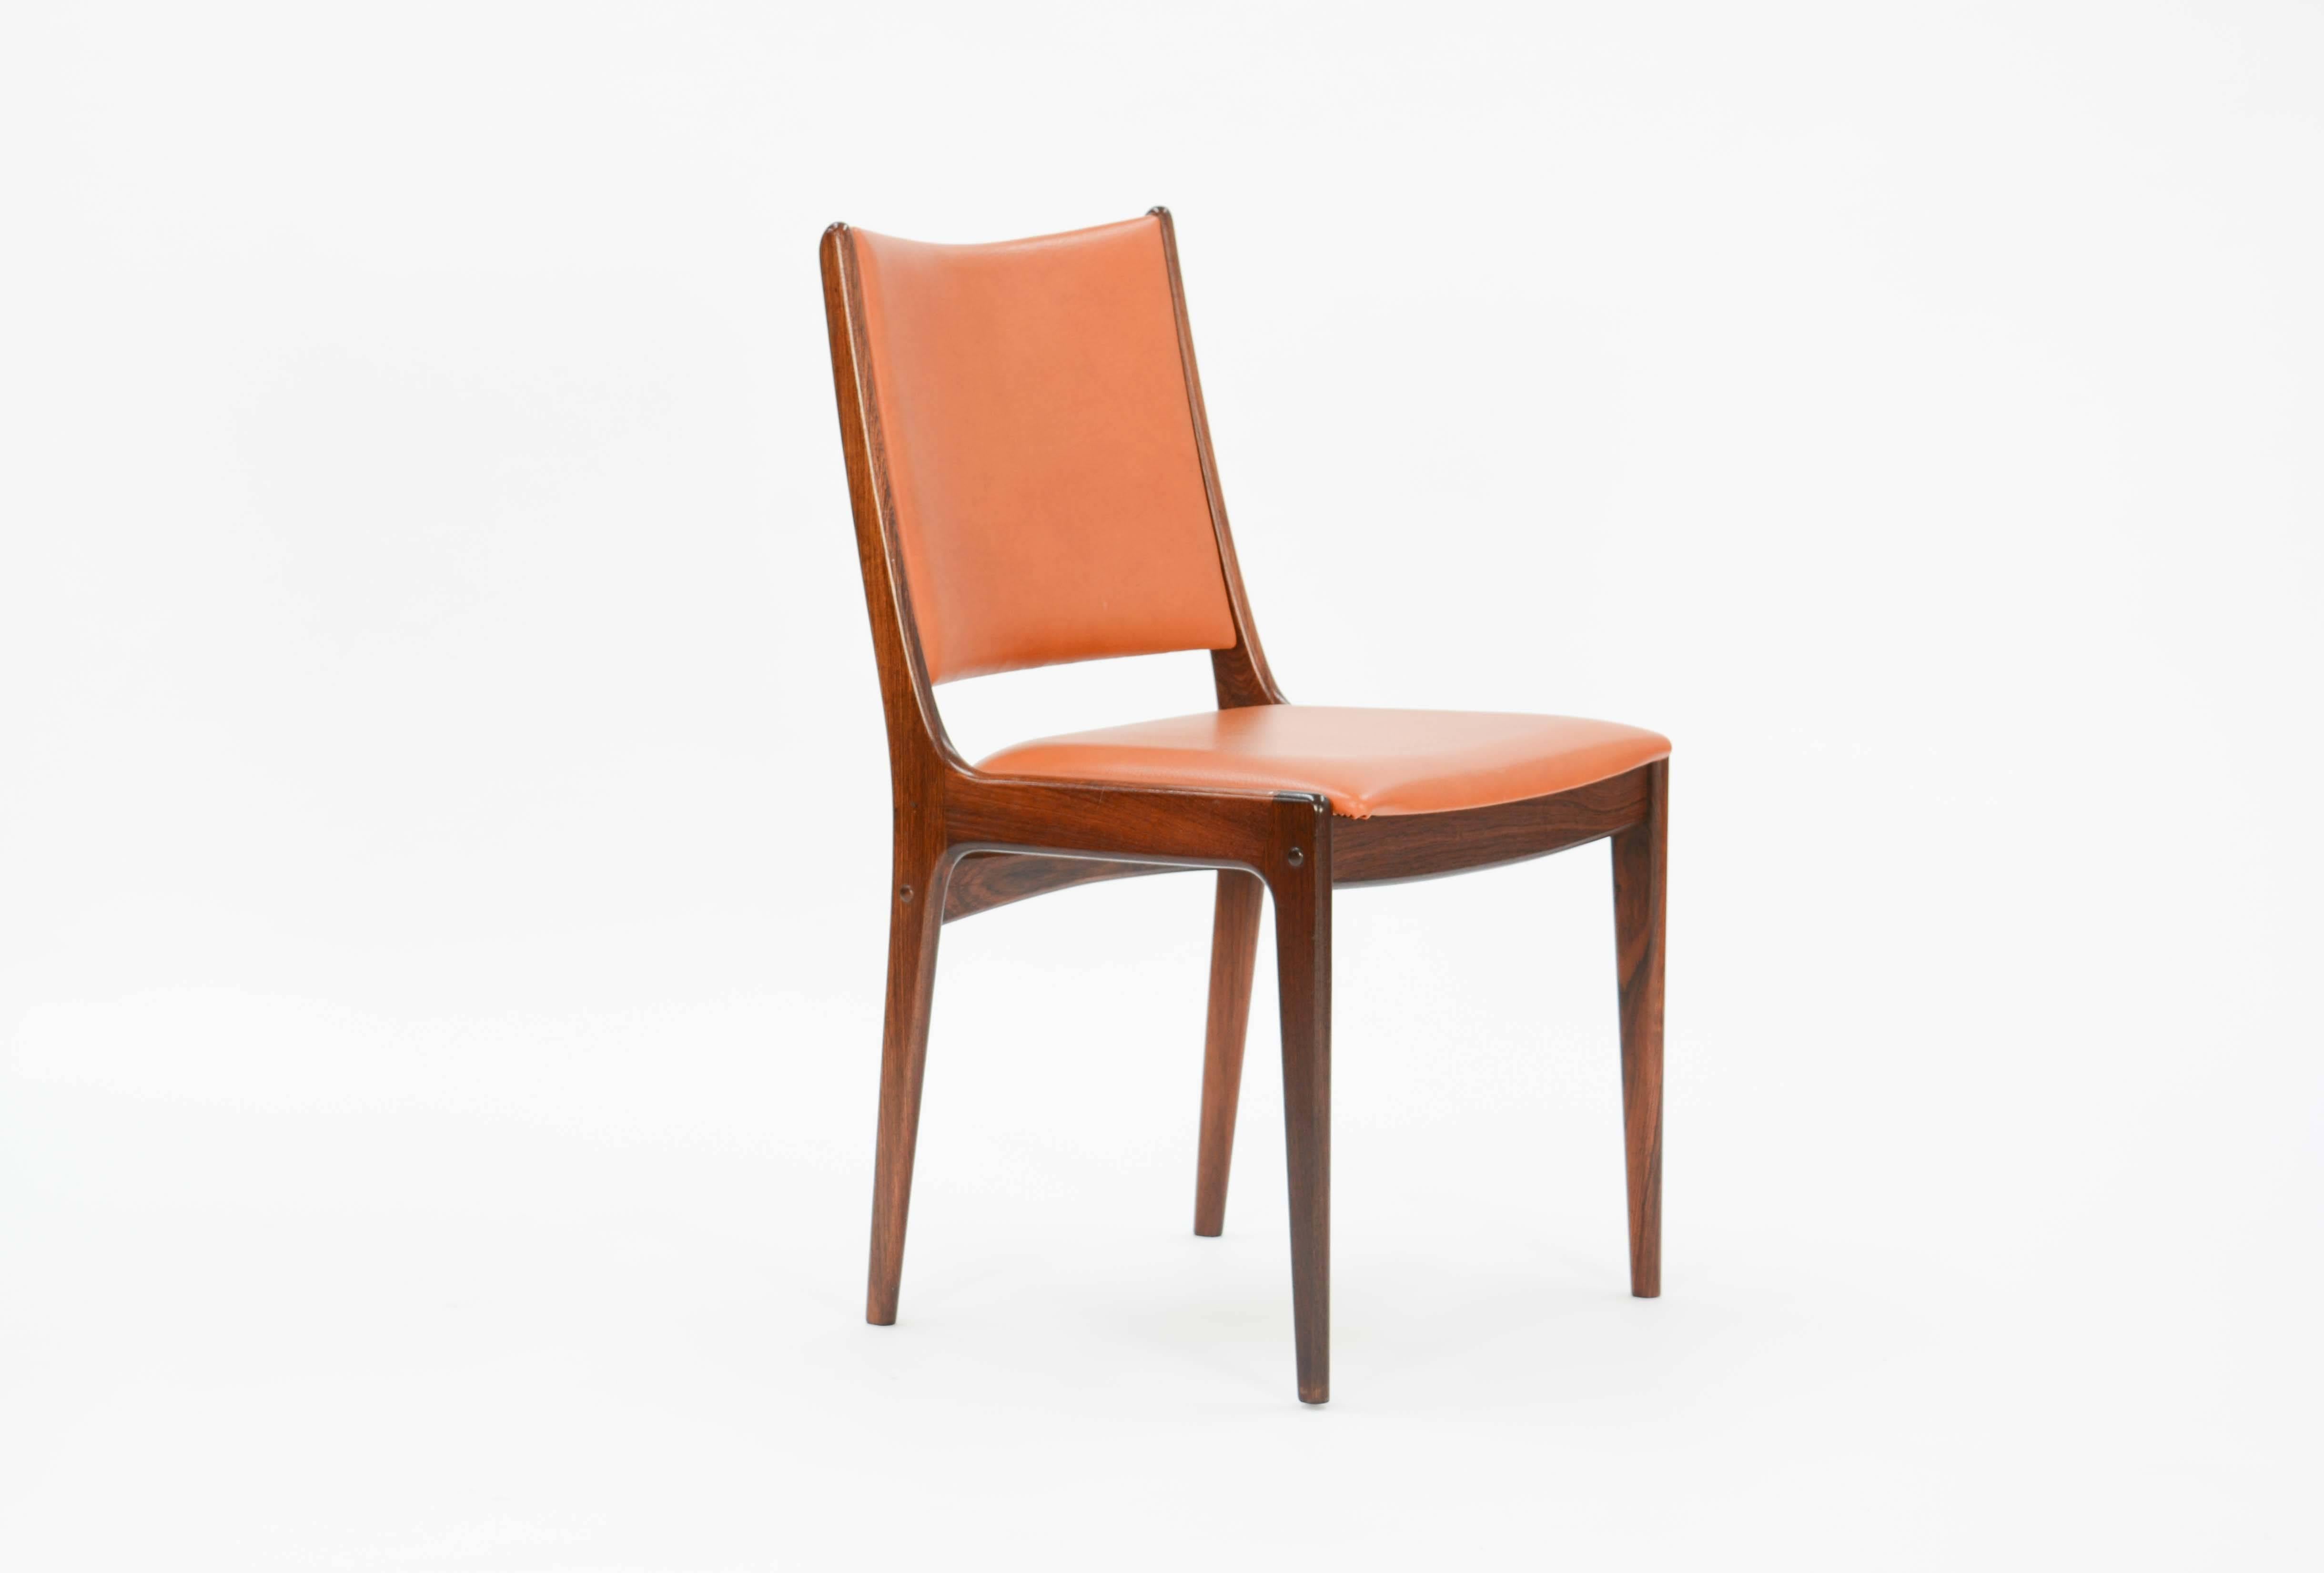 A wonderful set of four rosewood side chairs by Johannes Andersen for Uldum Møbelfabrik.

Andersen’s career paralleled the Mid-Century’s growing appreciation for Danish furniture designs, attracting international acclaim.

Andersen worked steadily